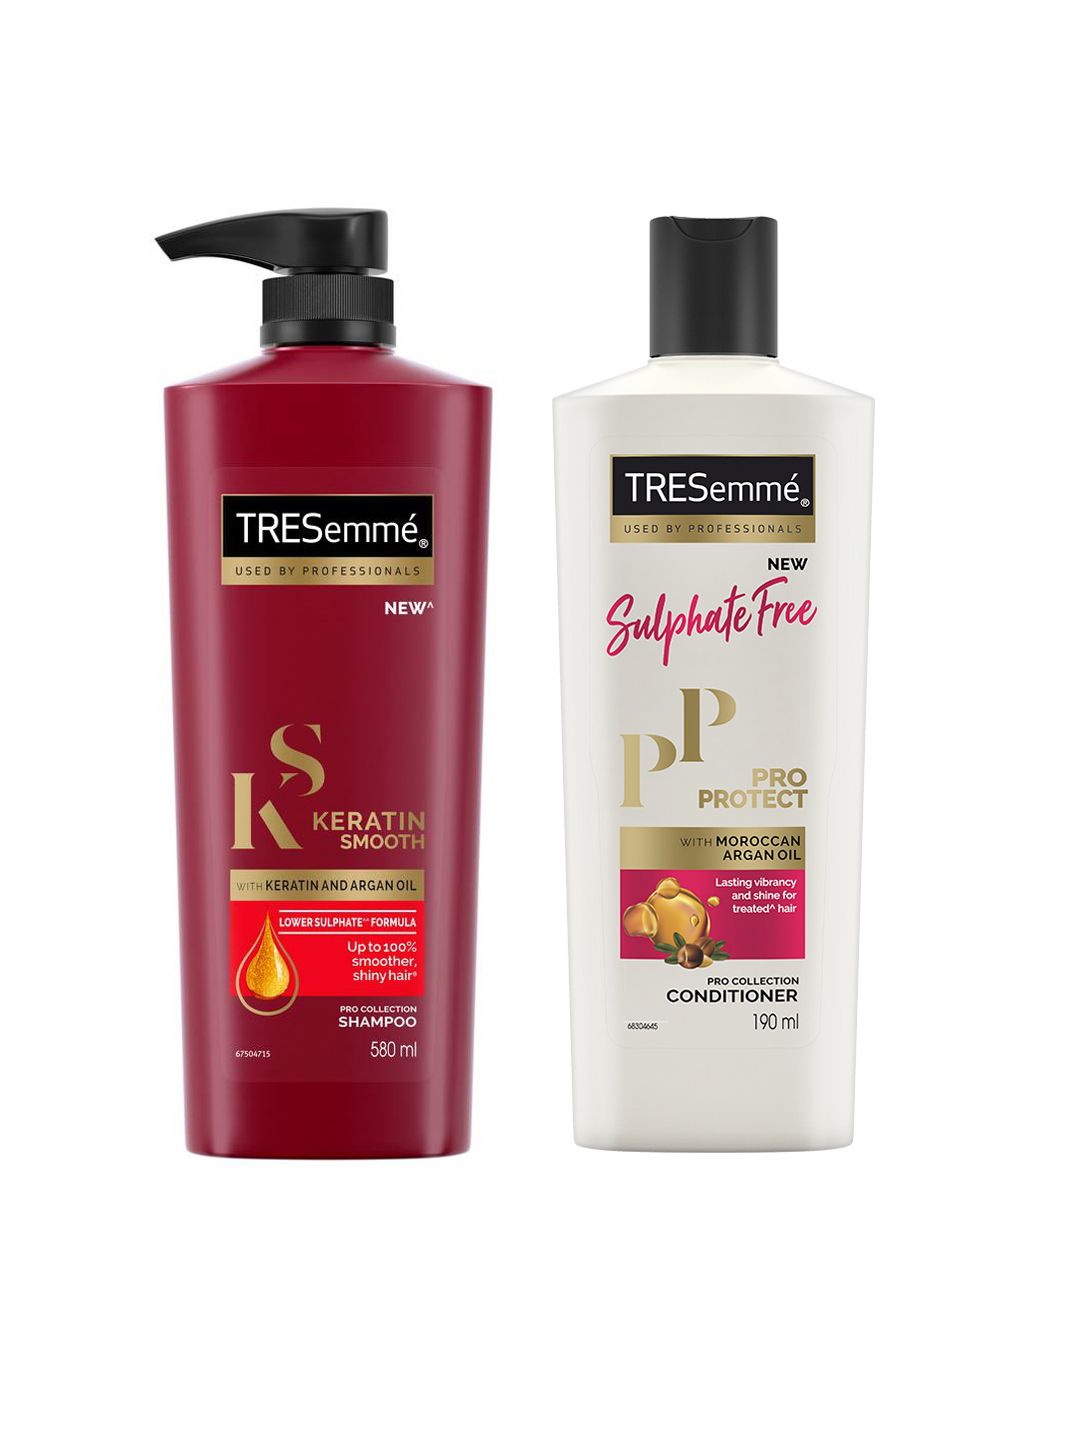 TRESemme Set Of Keratin Smooth Shampoo & Pro Protect Sulphate Free Conditioner Price in India